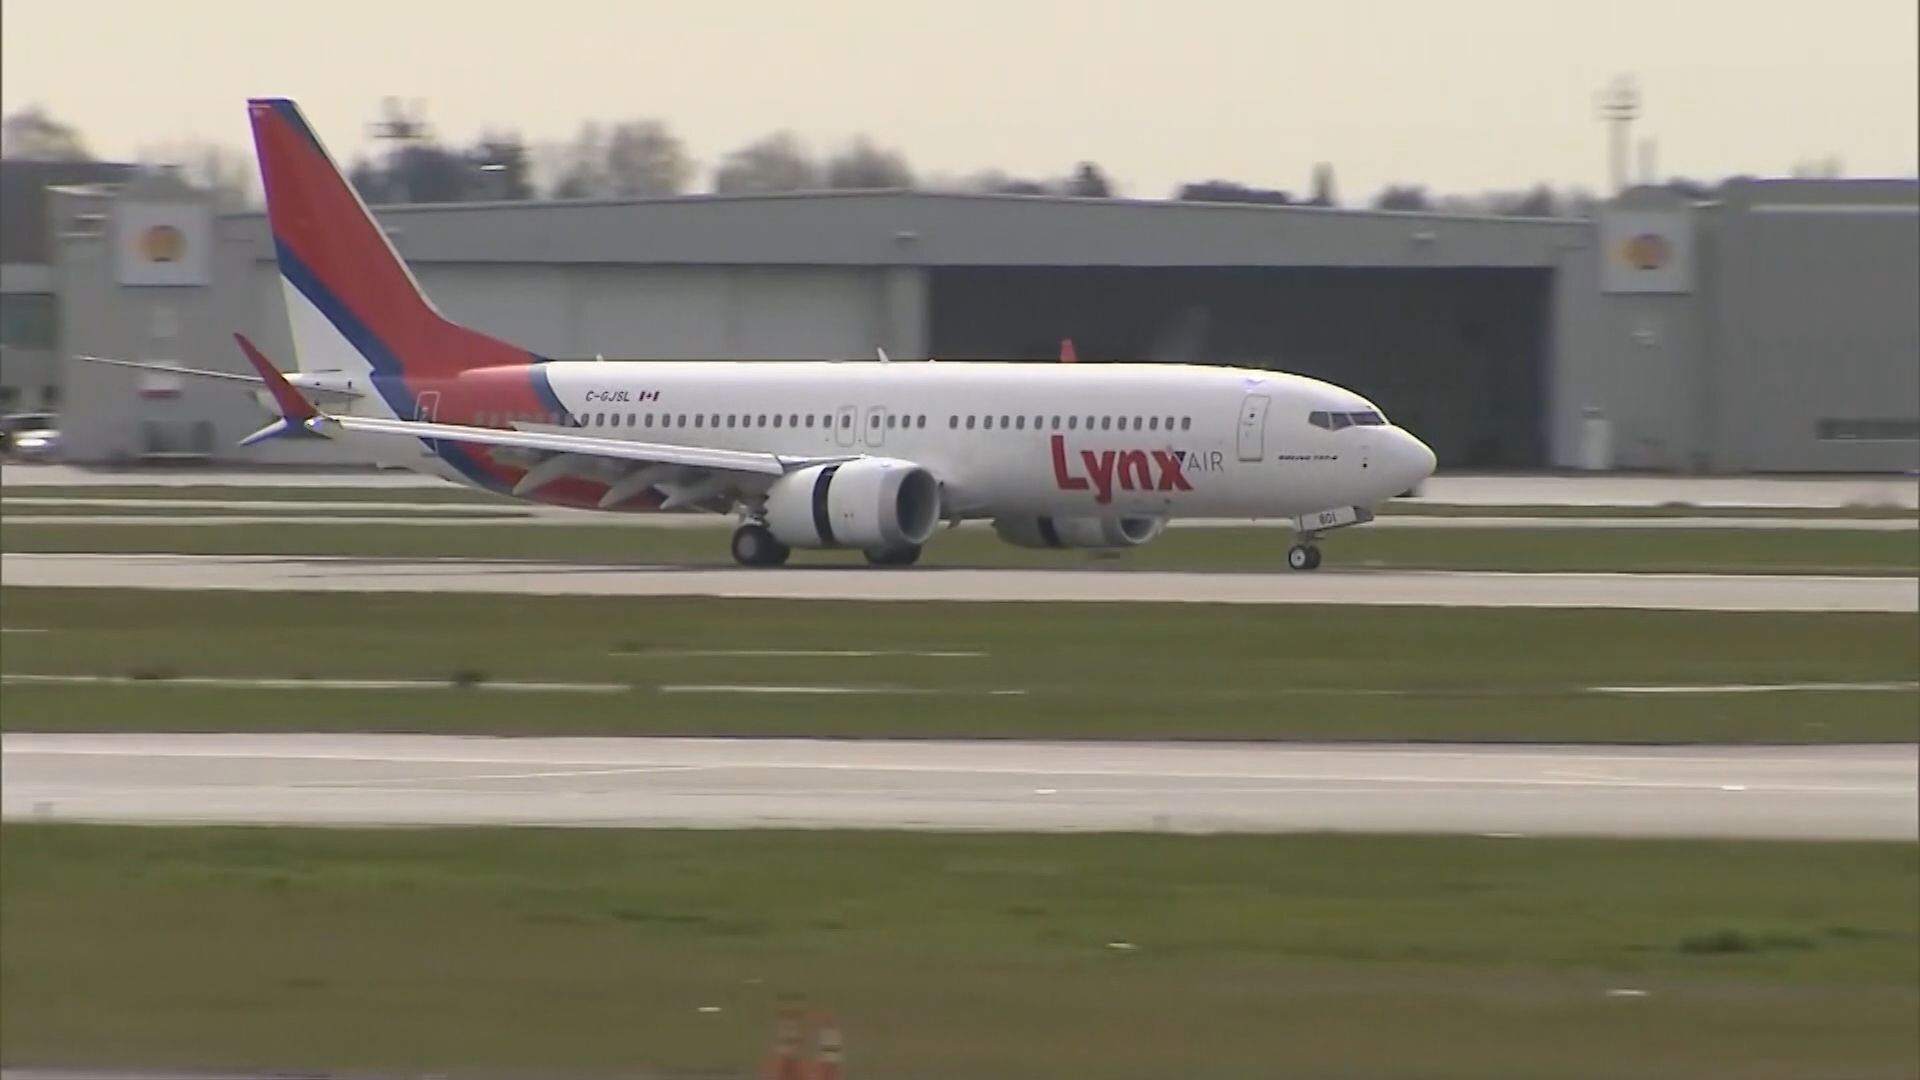 Lynx Air to cease operations, passengers left scrambling